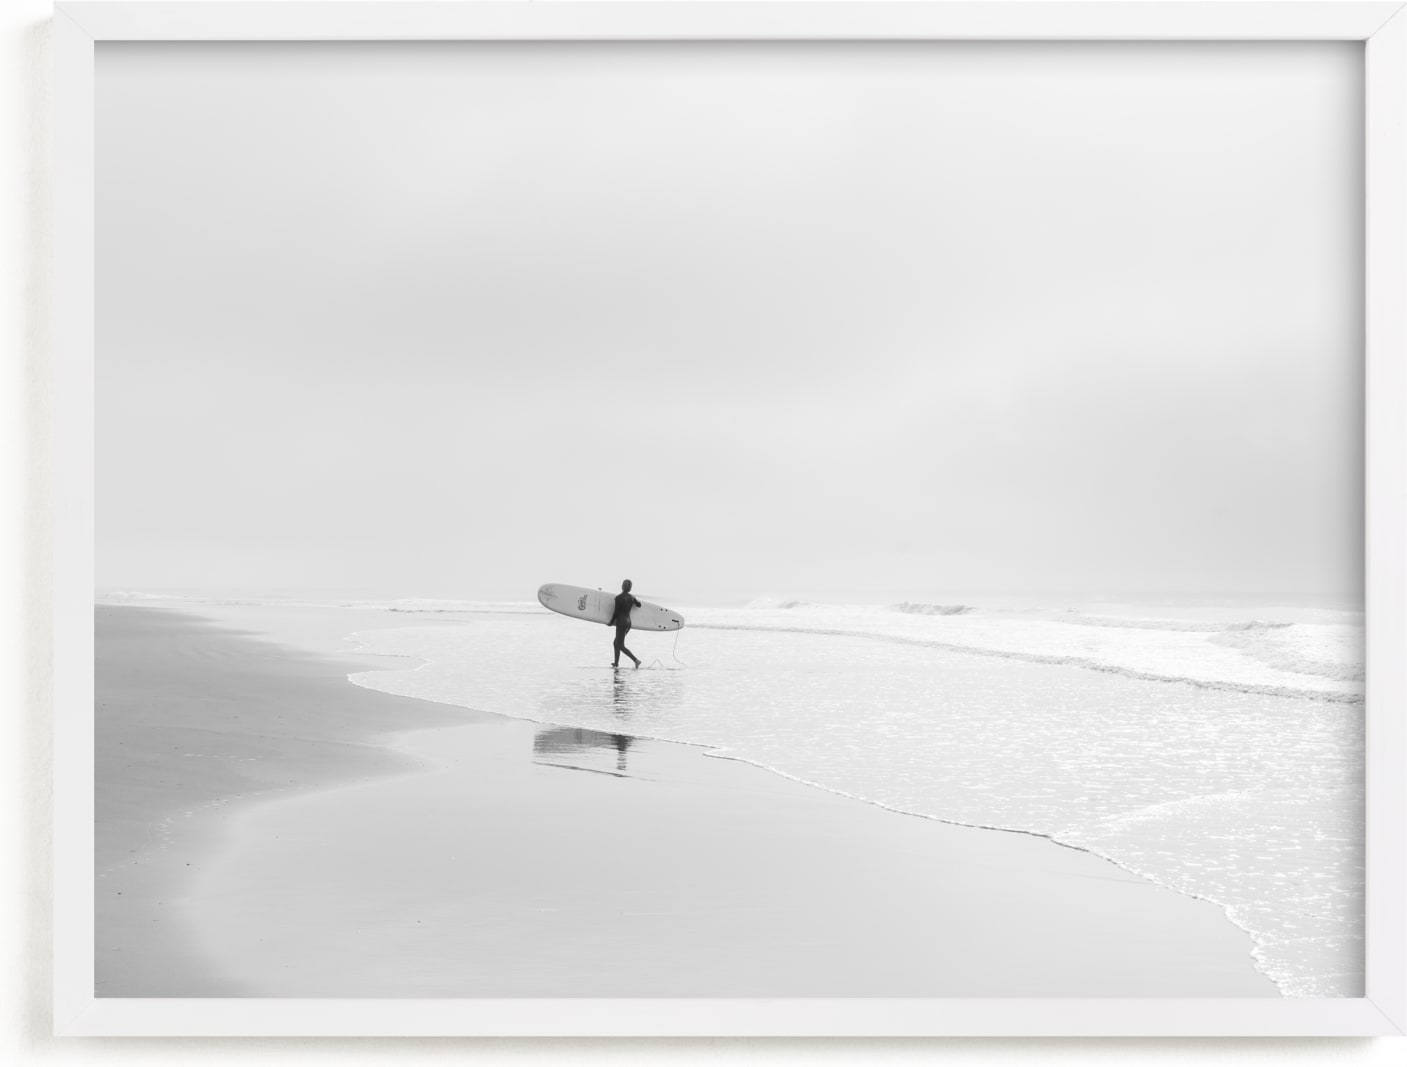 This is a black and white art by Jessica C Nugent called California Surf.